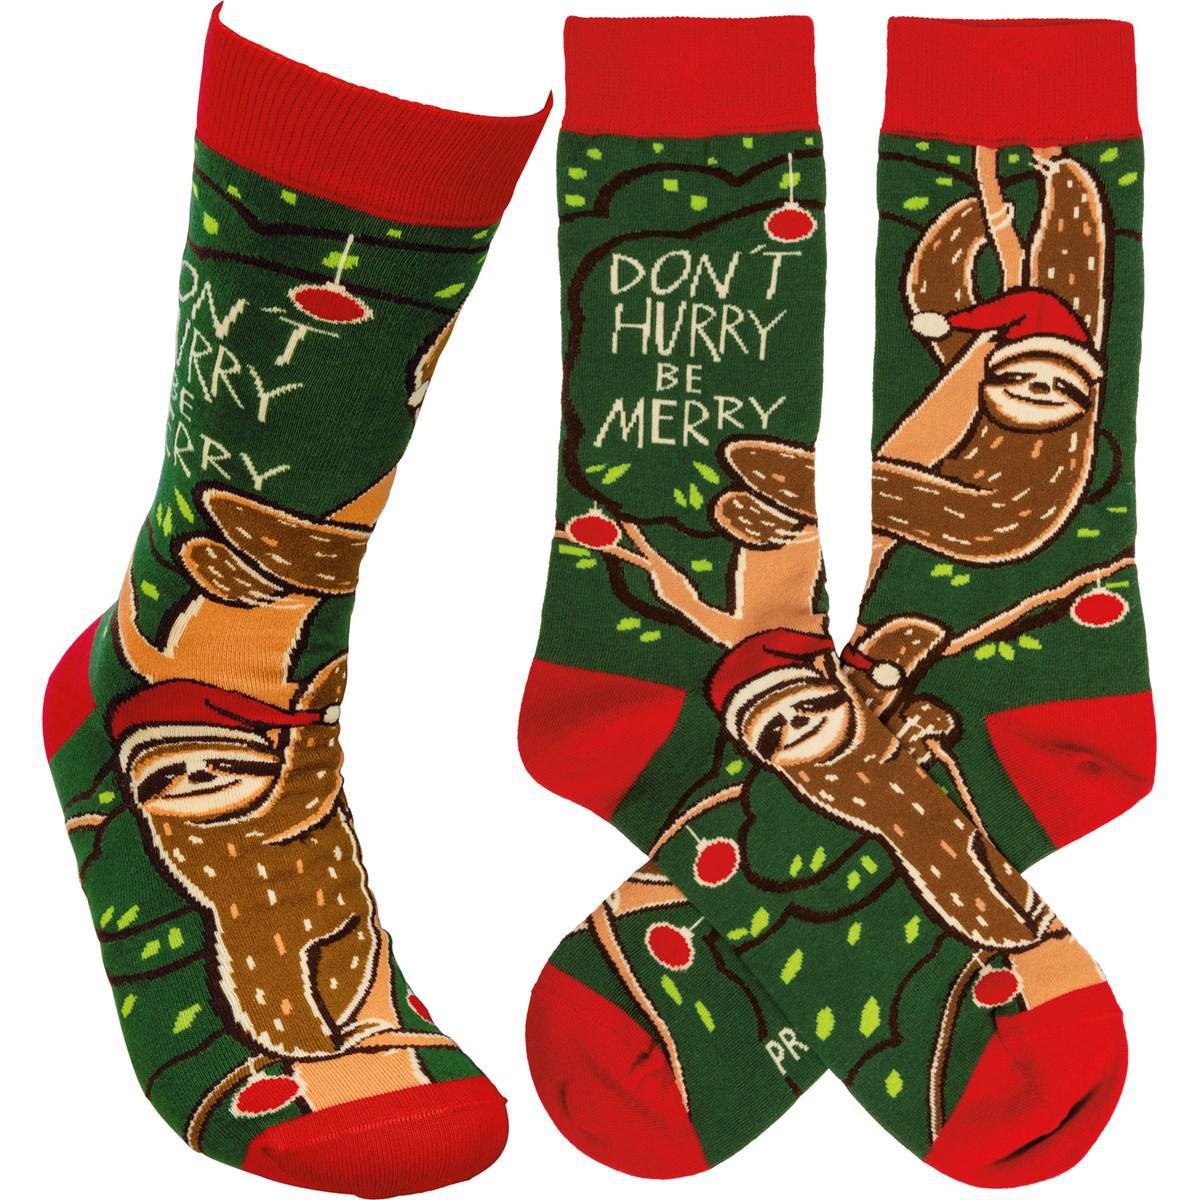 Don't Hurry Be Merry Socks